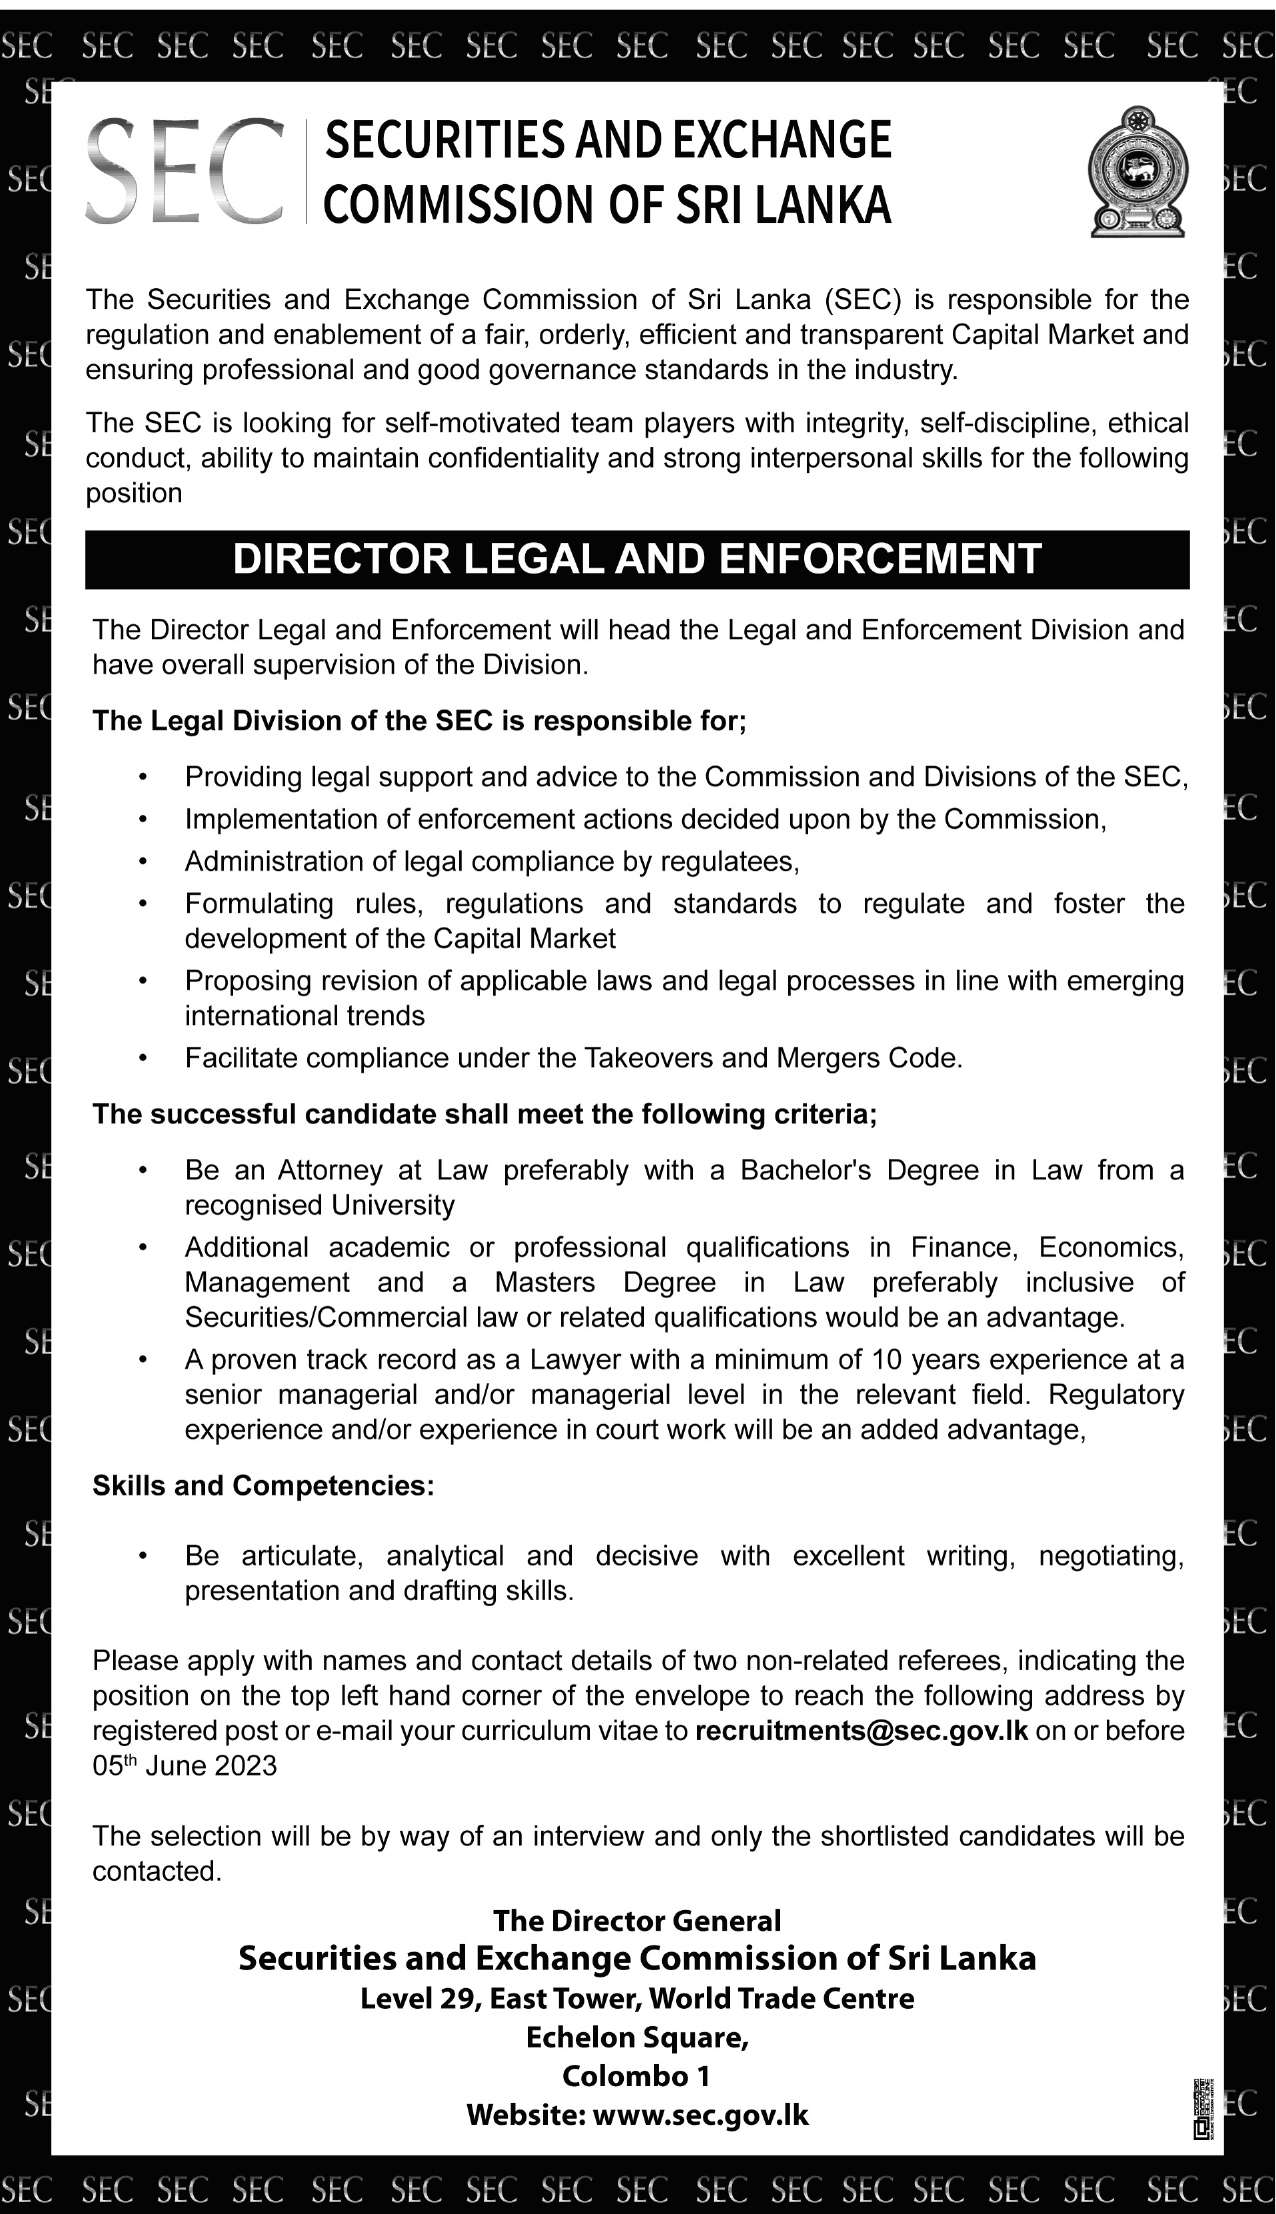 Director Legal and enforcement